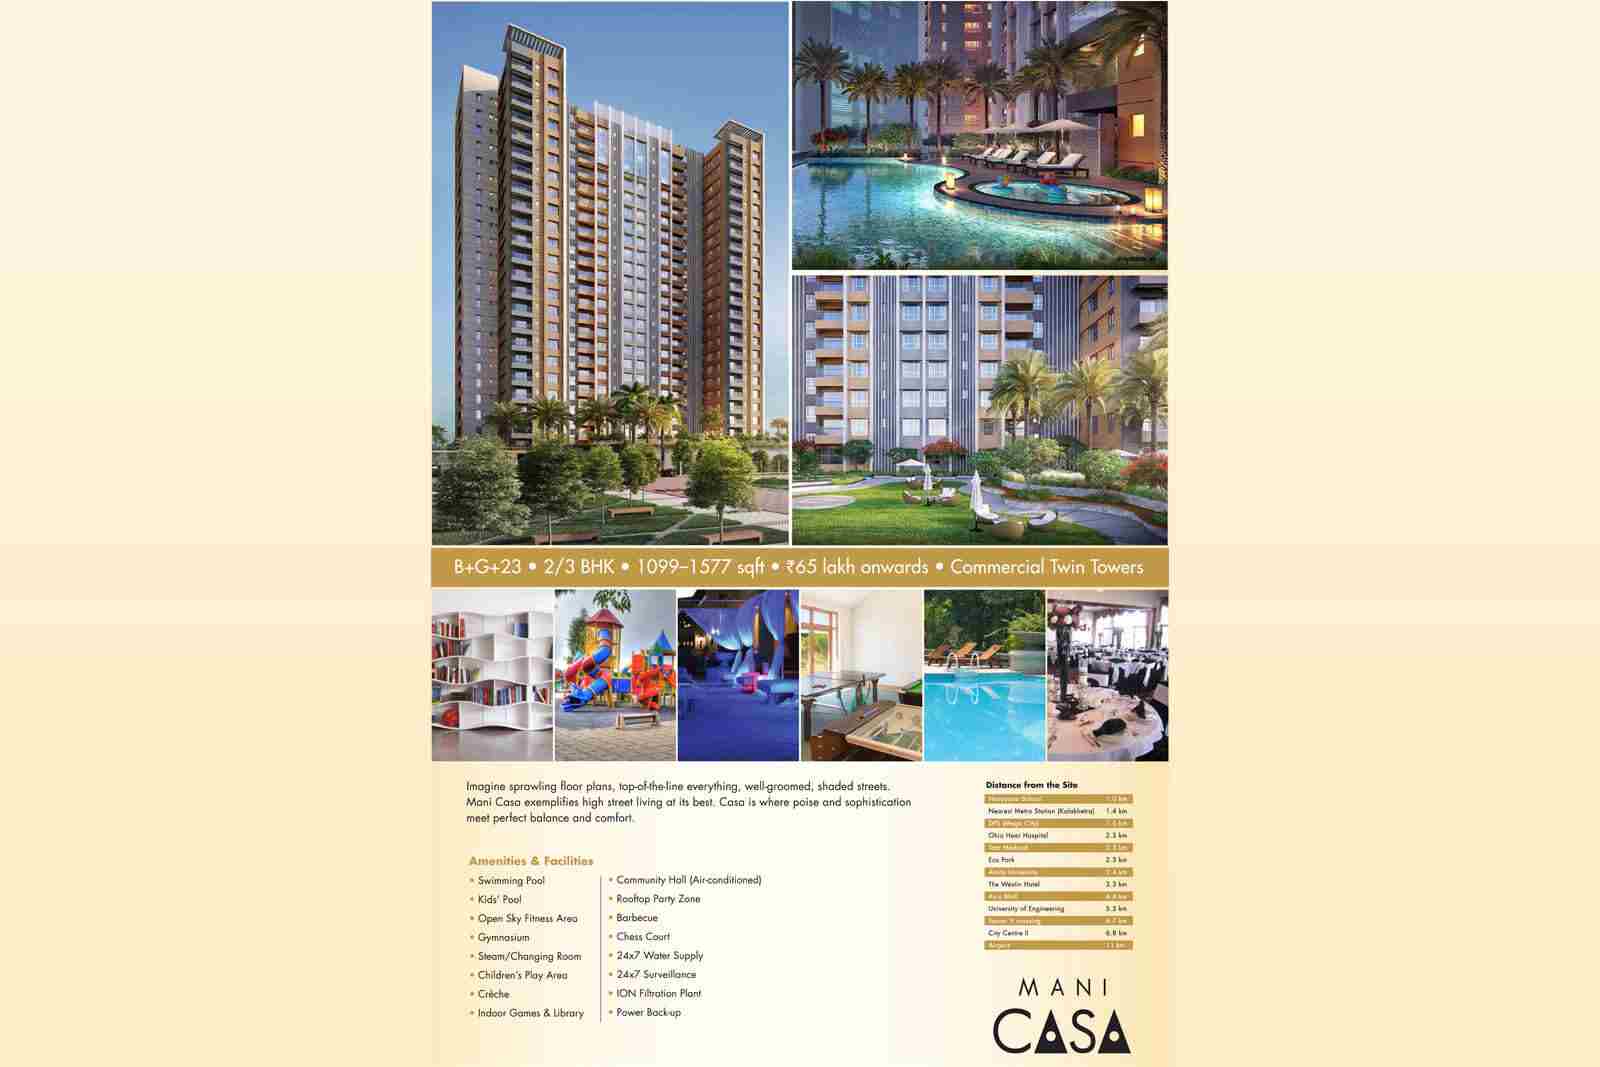 You can live in excellent abode with comfort at Mani Casa in Kolkata Update